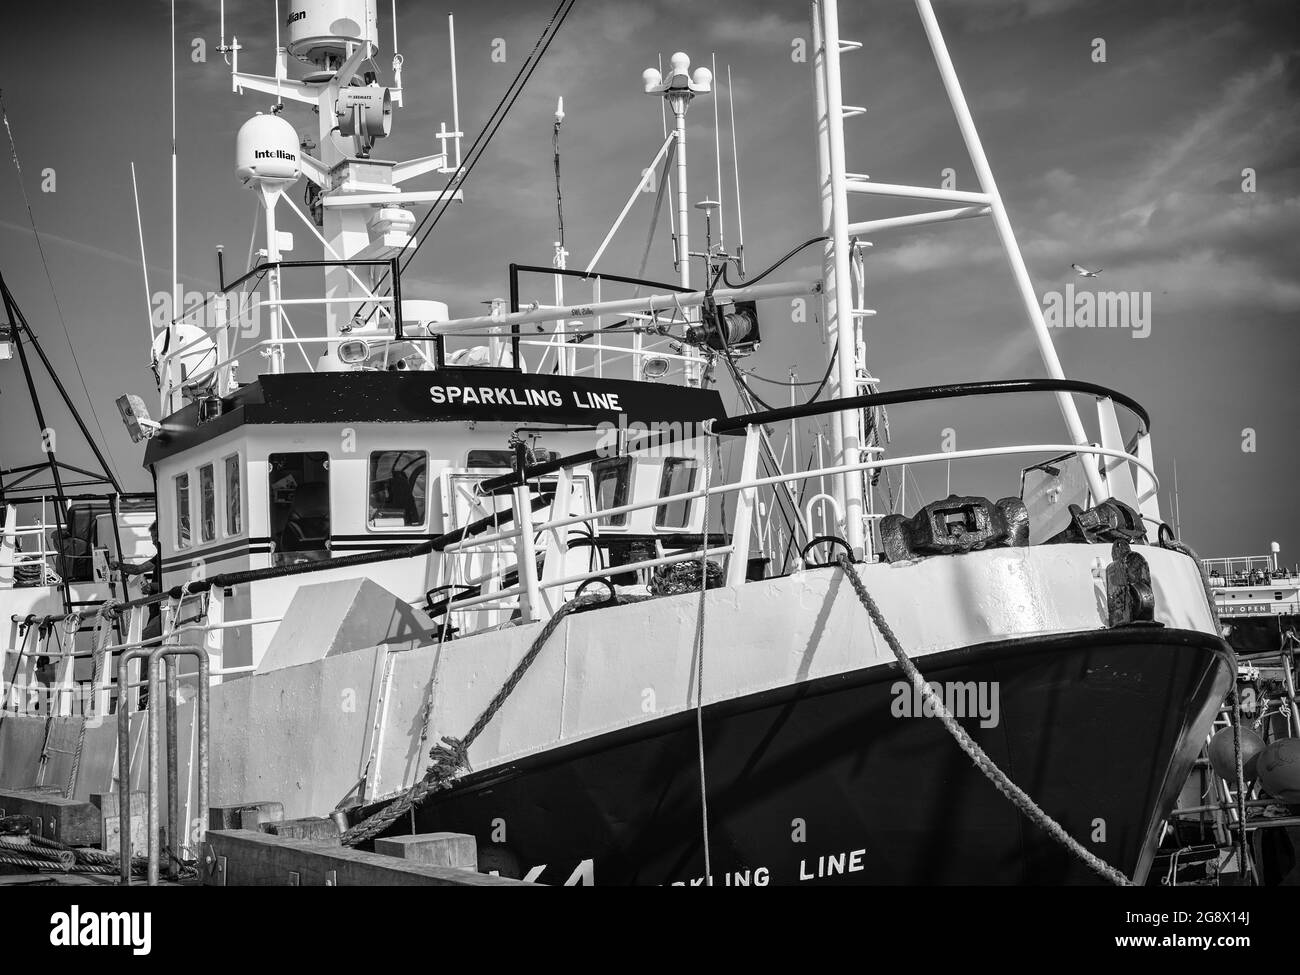 A freshly painted trawler is moored alongside a wharf.  Antennae and radar bristle above the bridge and a sky with clouds is above. Stock Photo